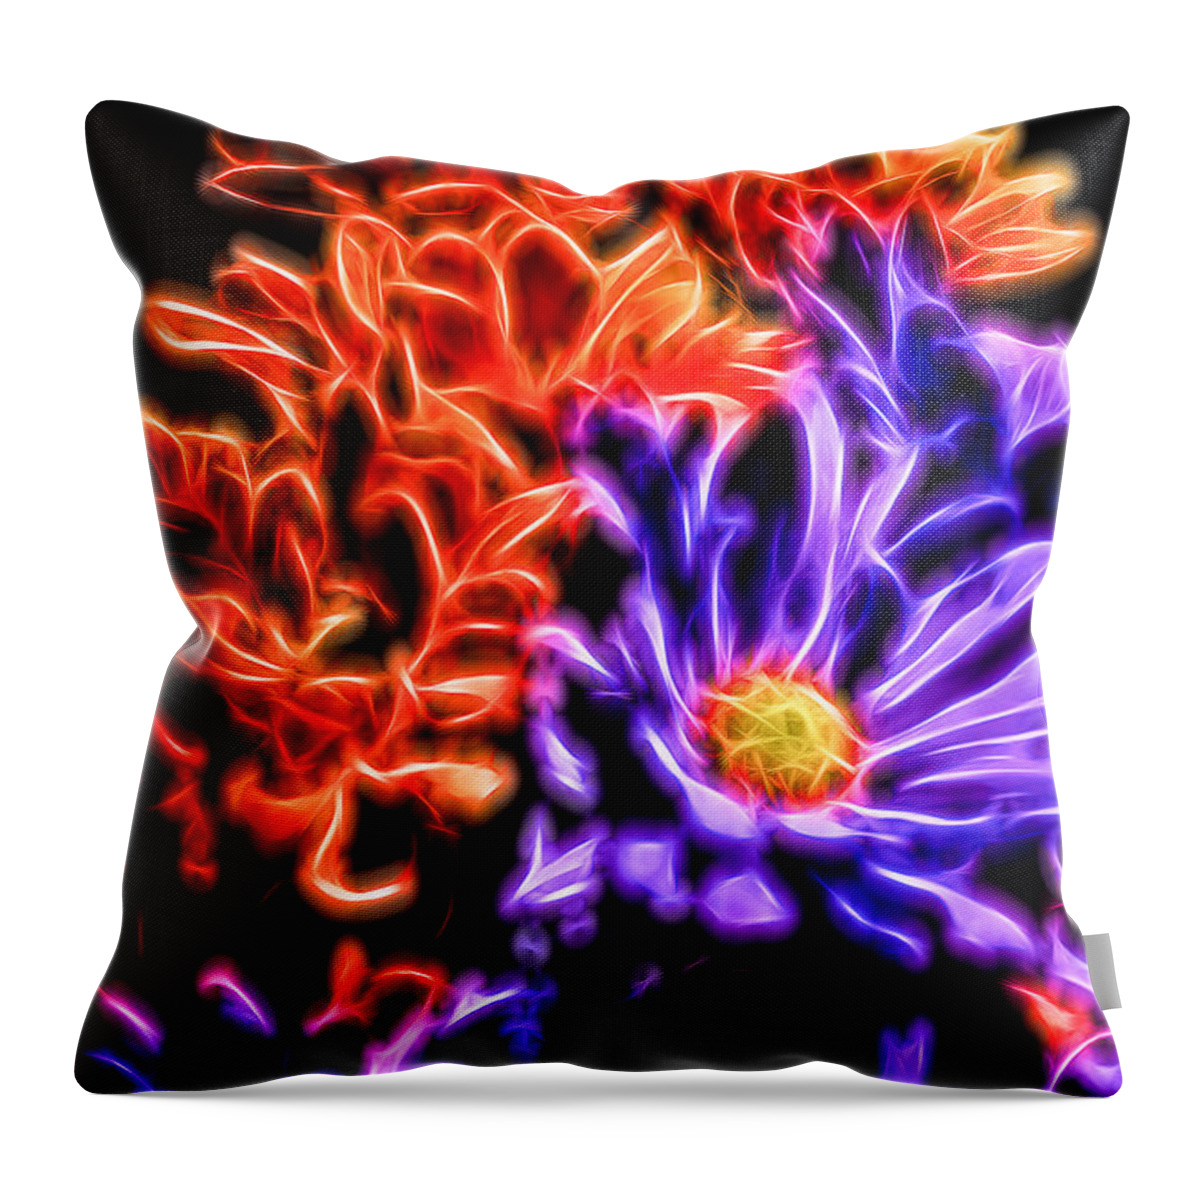 Topaz Glow Throw Pillow featuring the photograph Spatial Glow by Marshall Barth